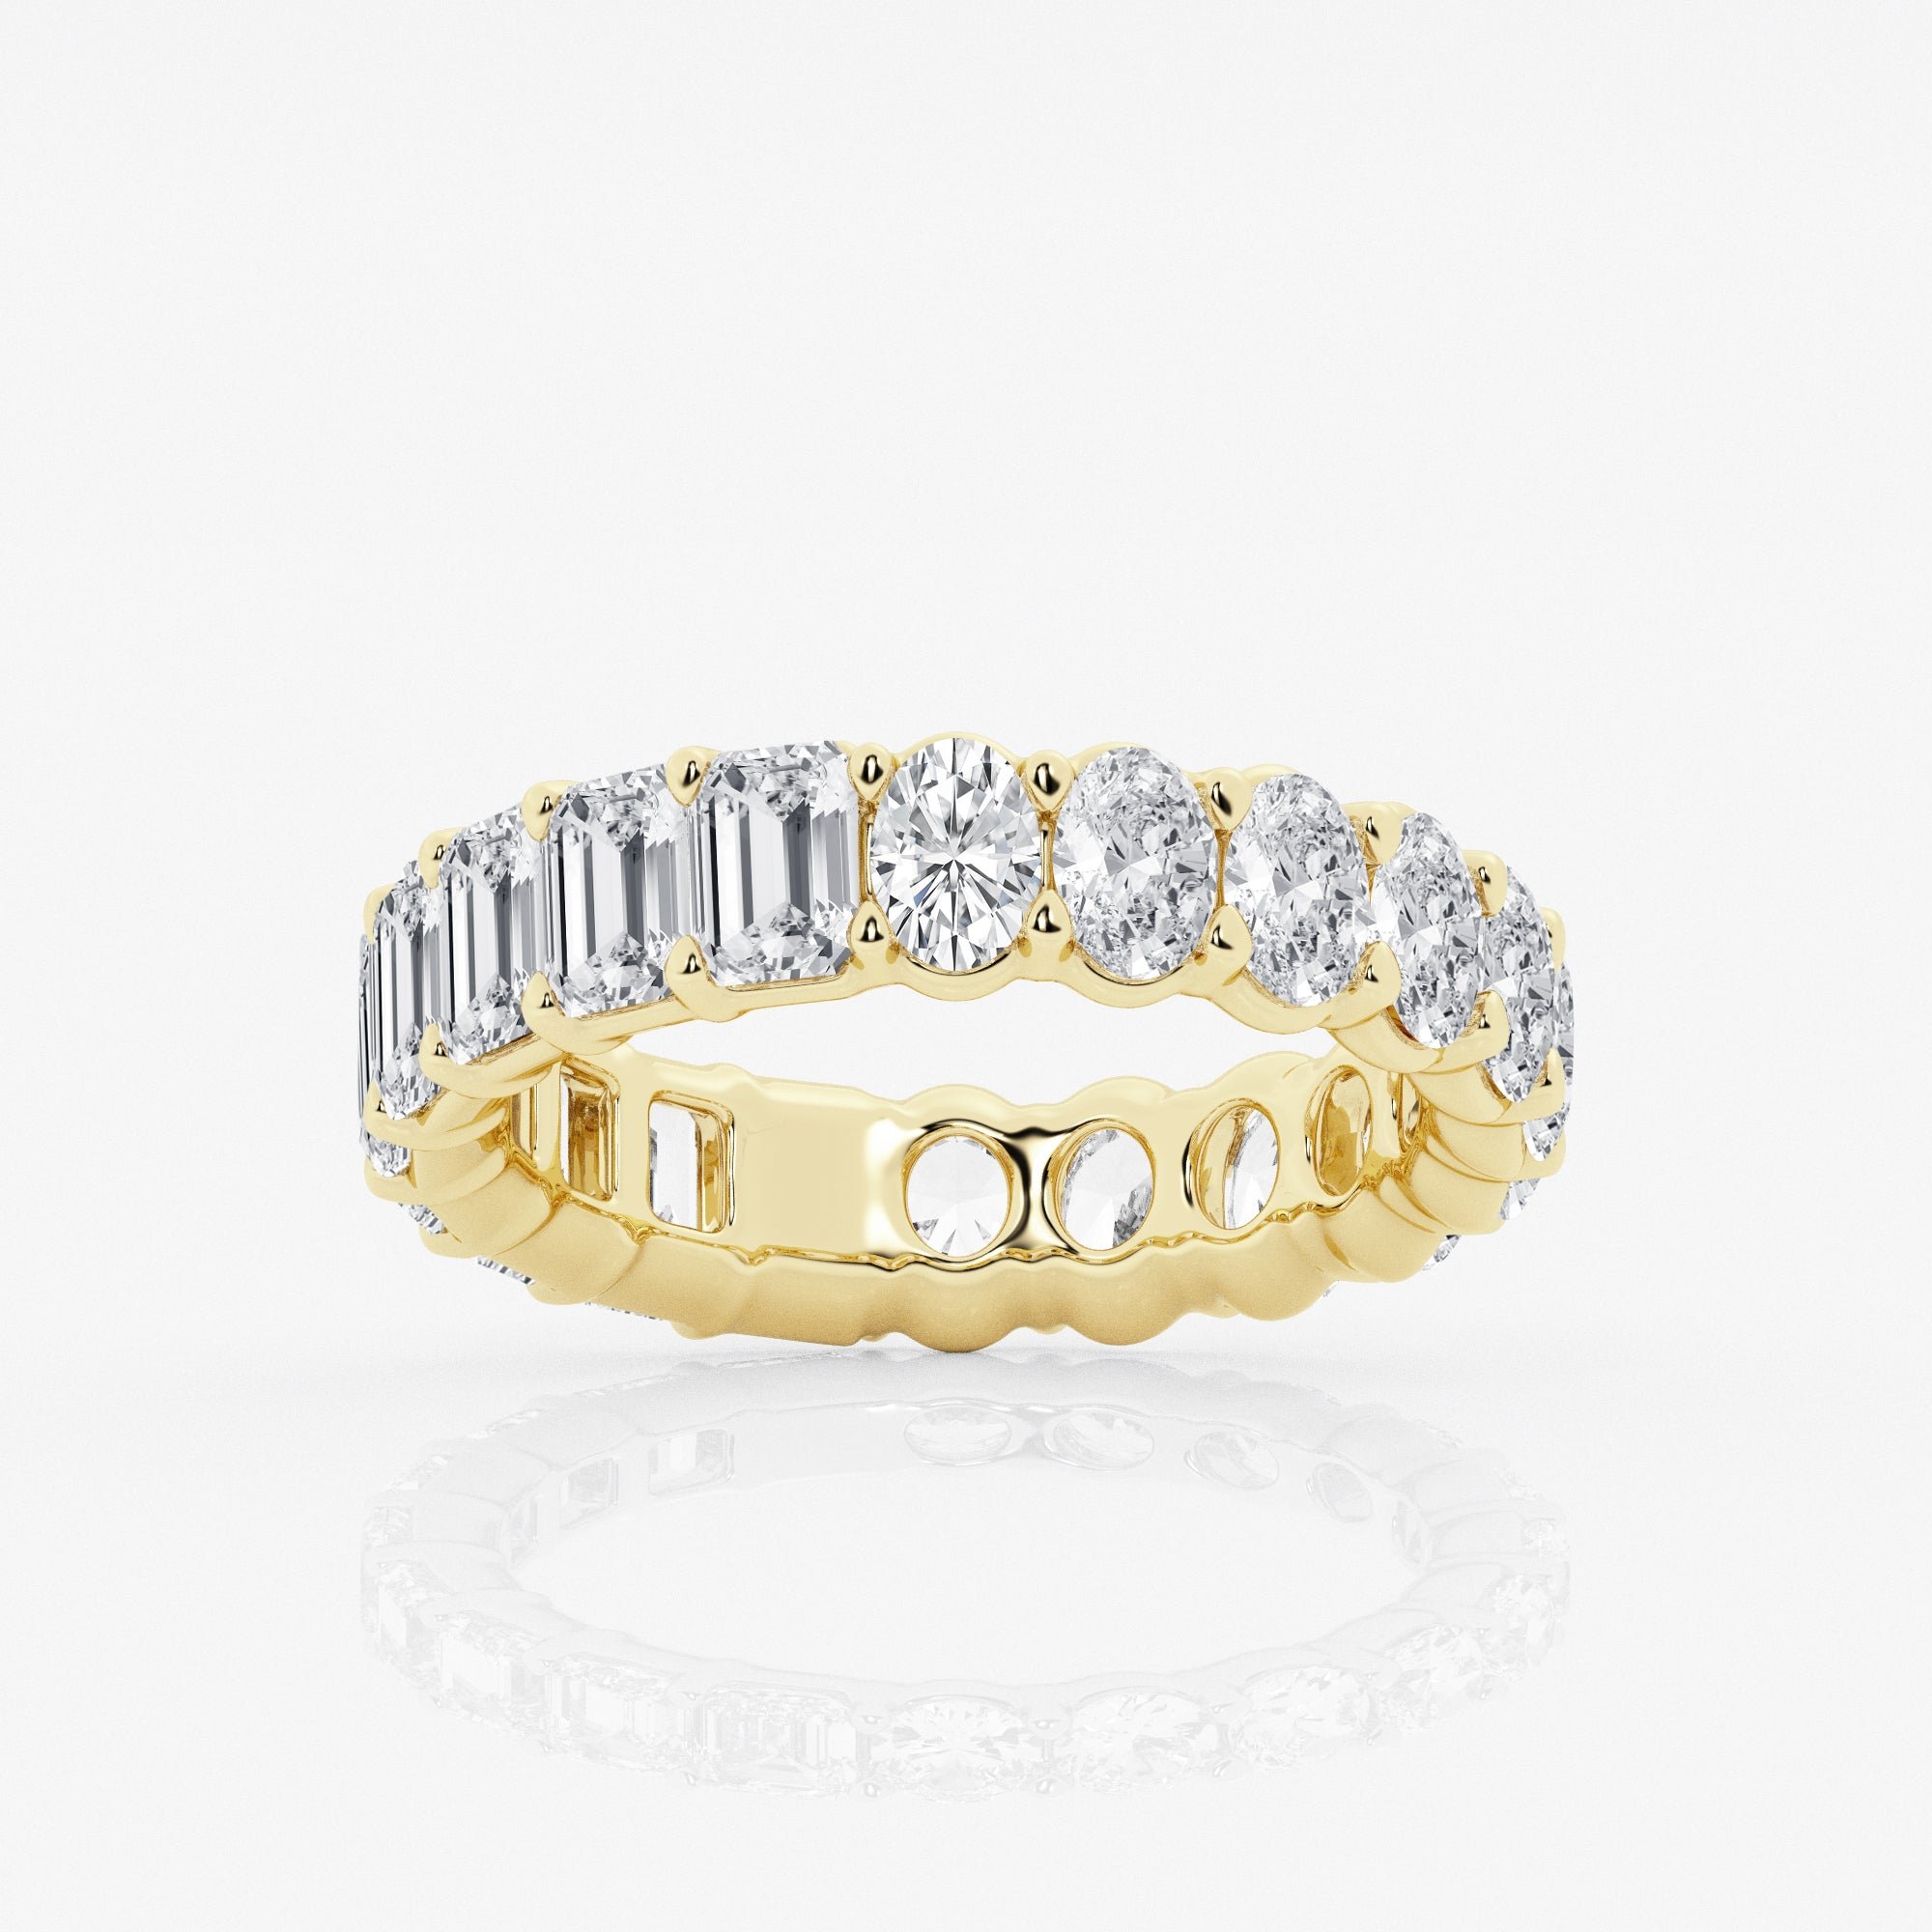 14kt yellow gold/4/4.25/4.75/5/5.25/5.5/5.75/6/6.25/6.5/6.75/7/7.25/7.5/7.75/8/8.25/8.5/8.75/9/top